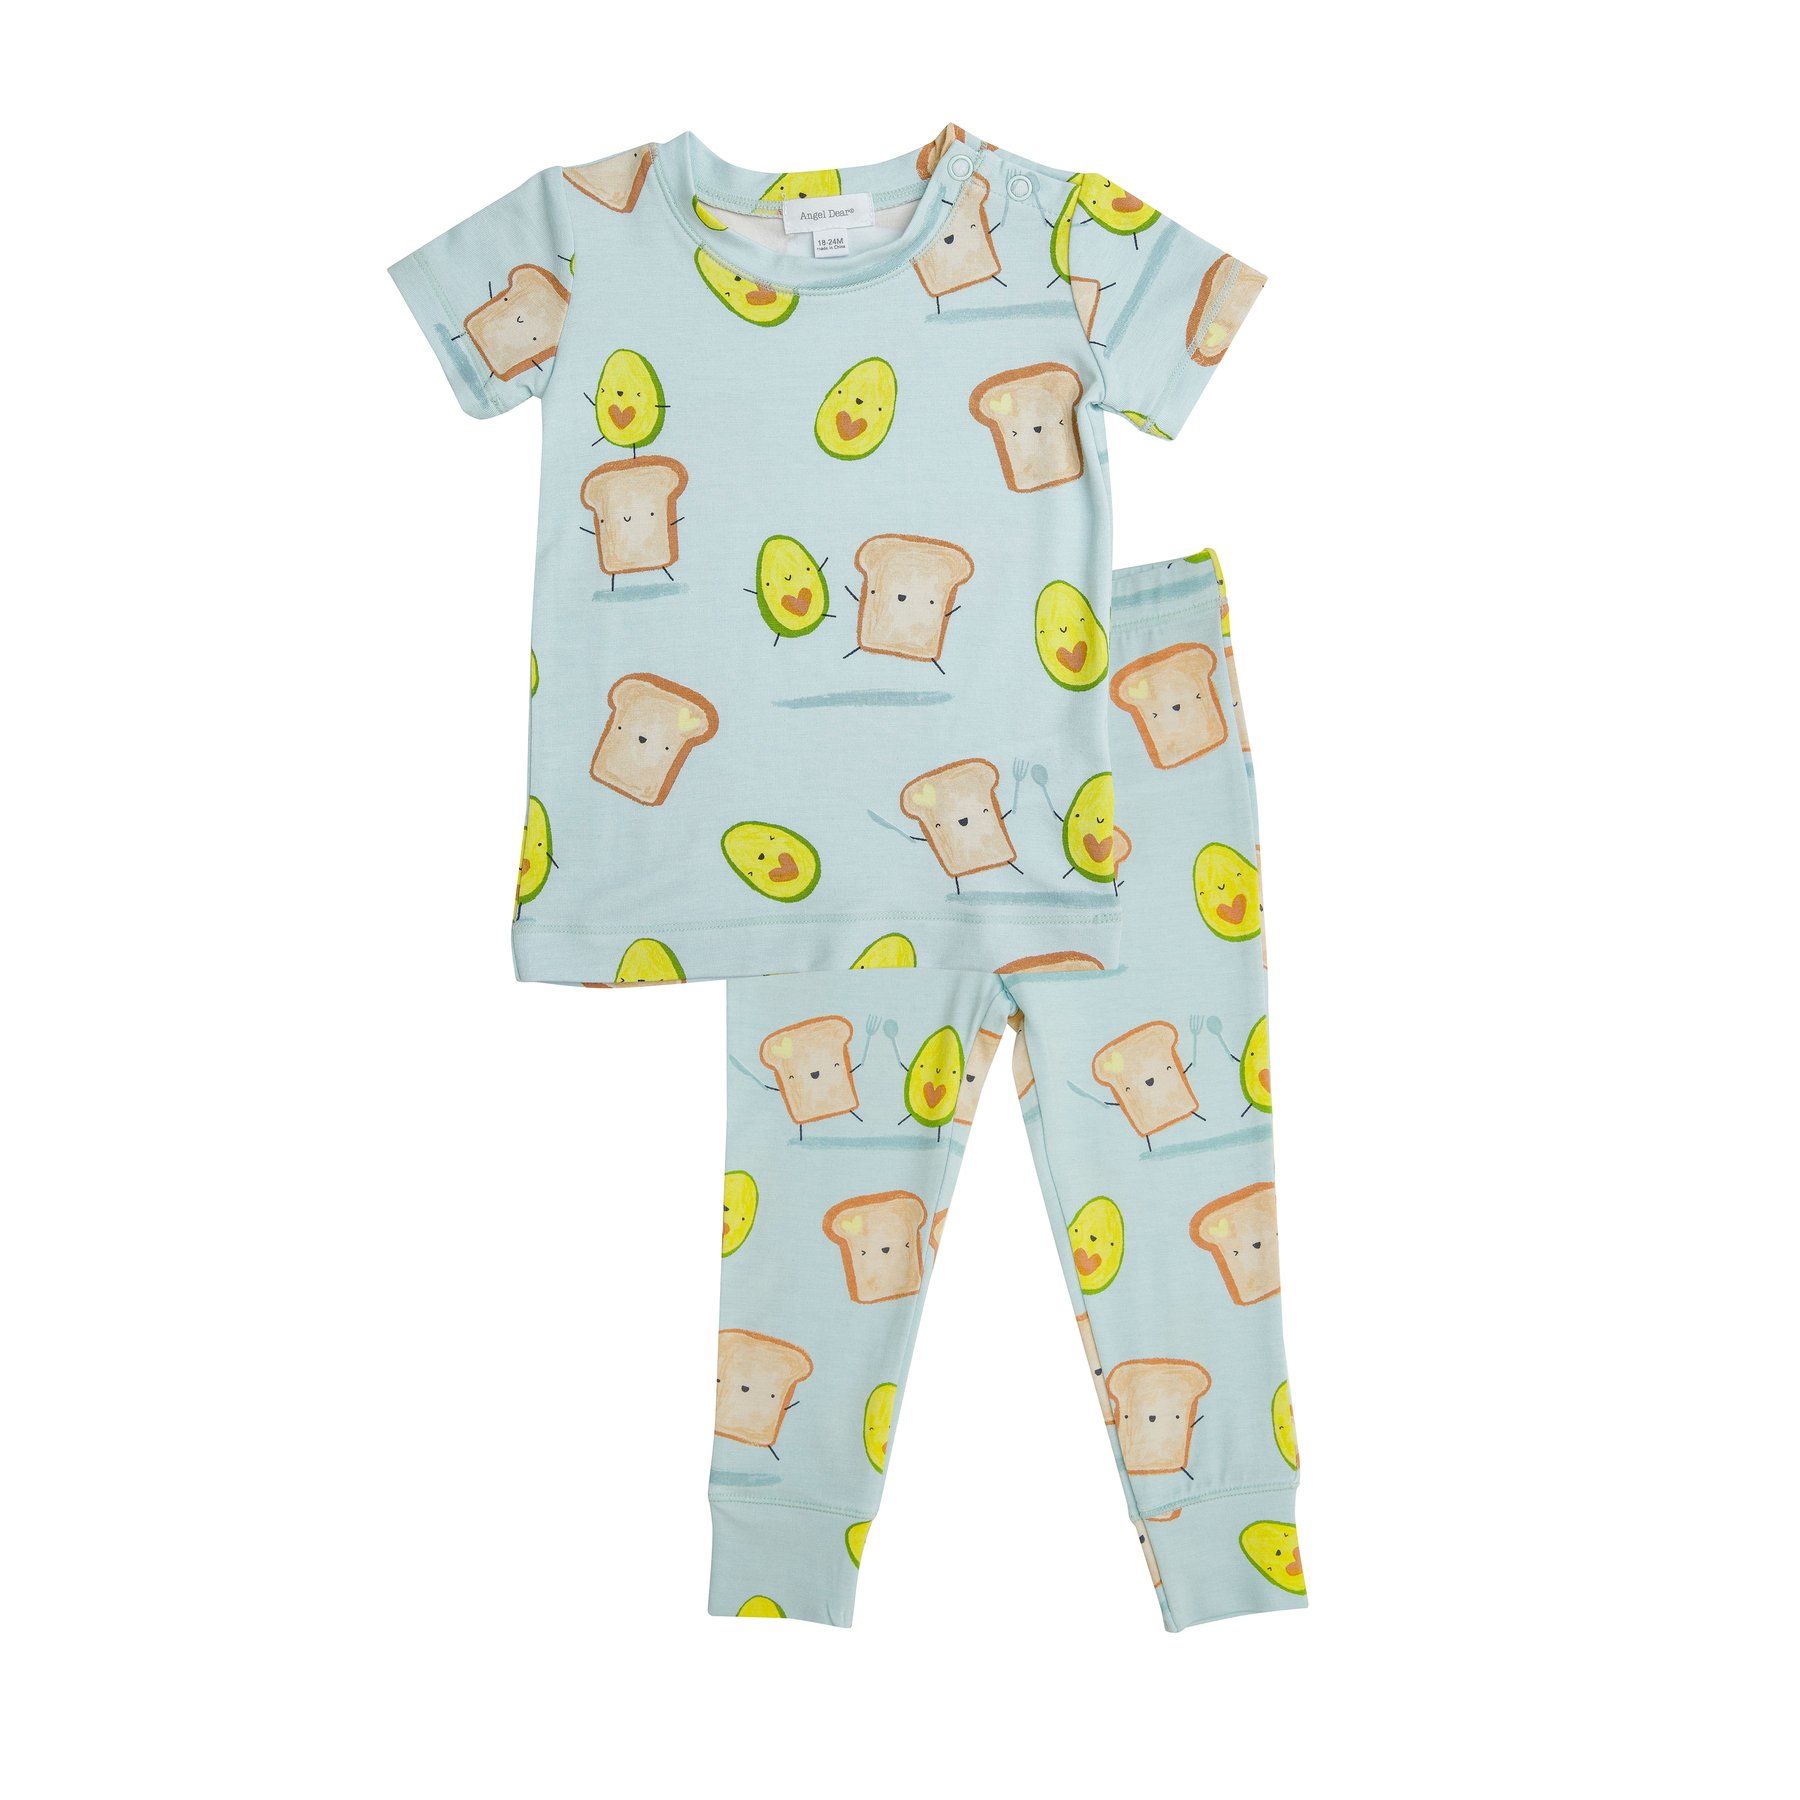 10 Wonderful Bamboo Baby Clothes Brands - Anna in the House